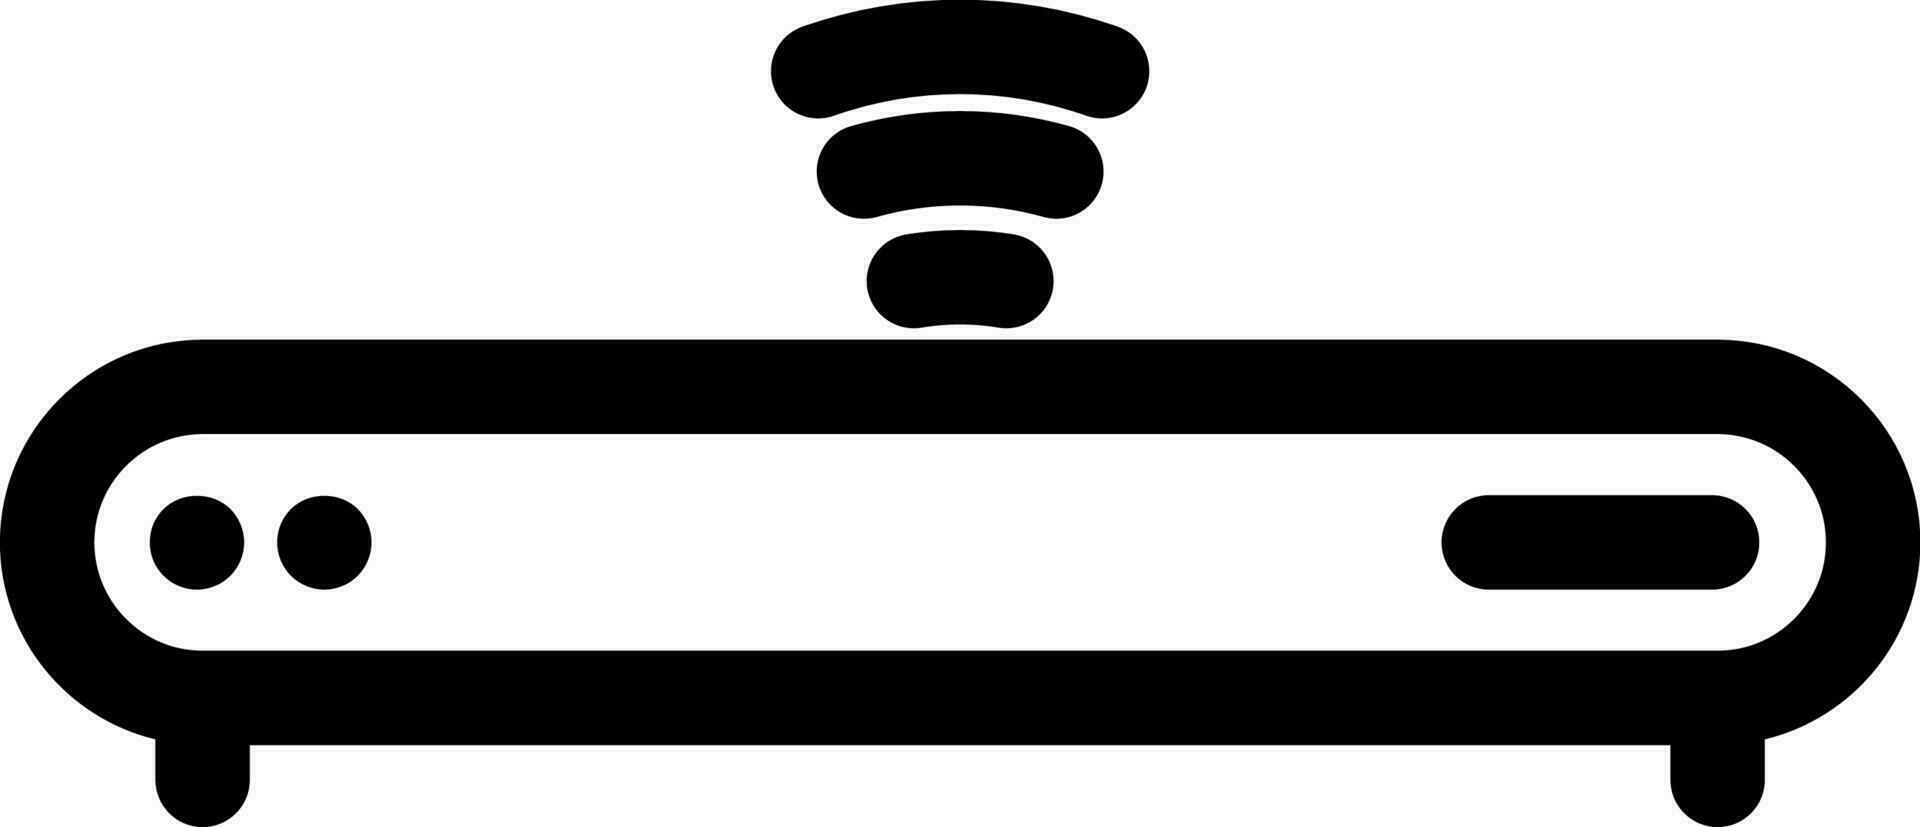 Router icon or symbol in black line art. vector